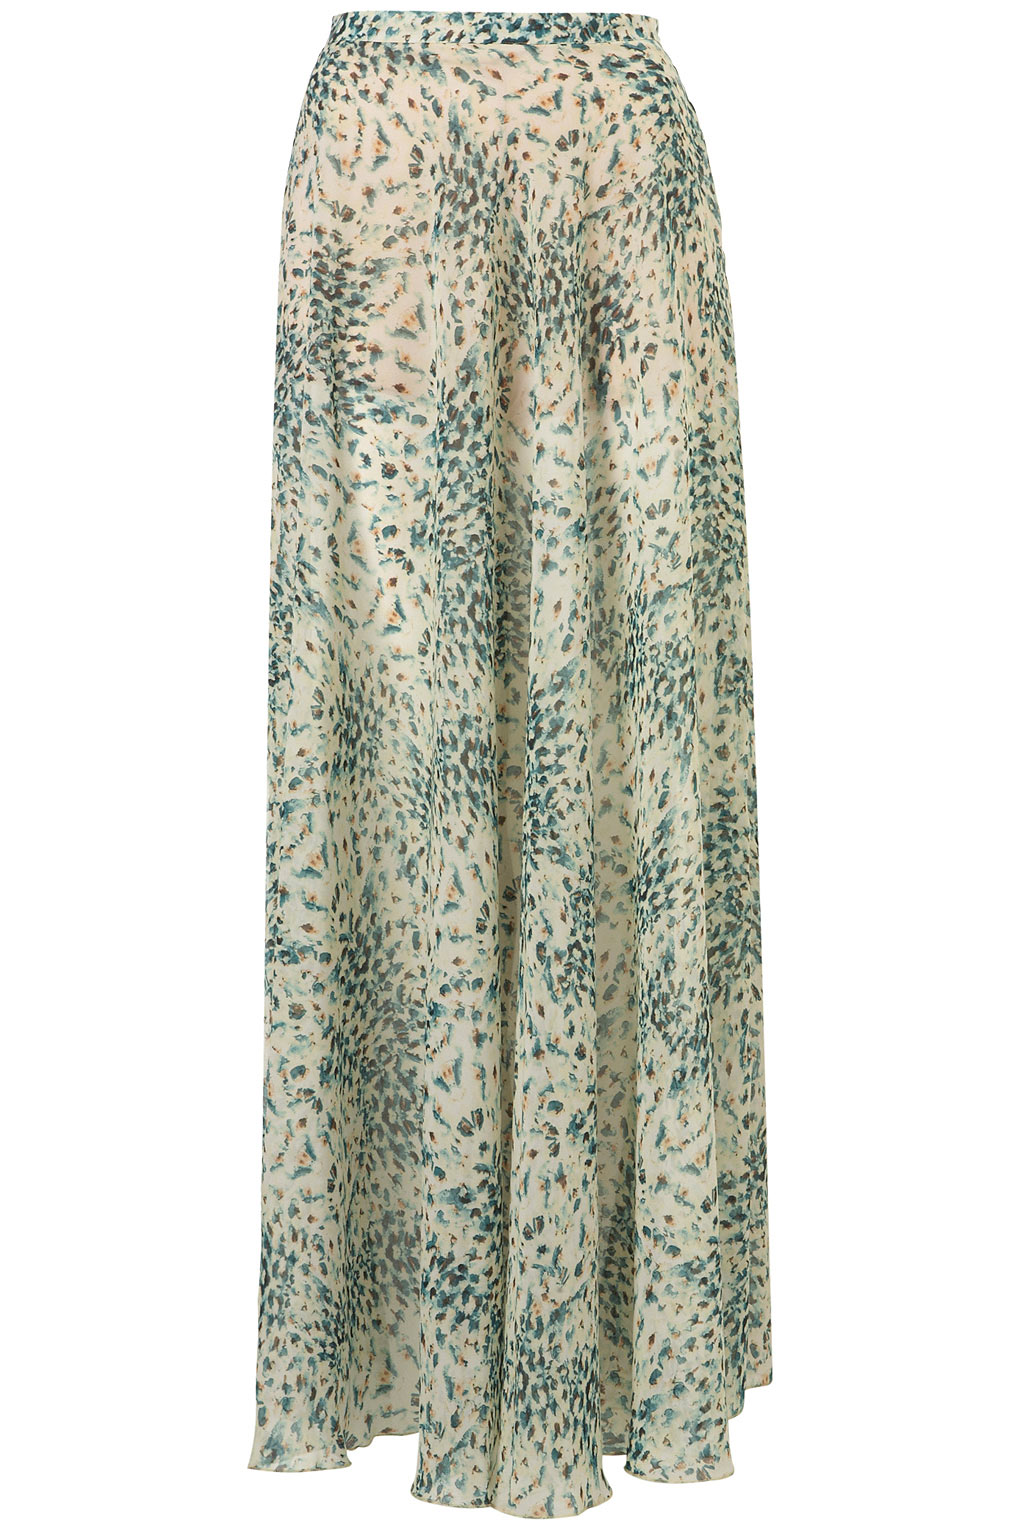 Topshop Floral Print Maxi Skirt in Green (multi) | Lyst